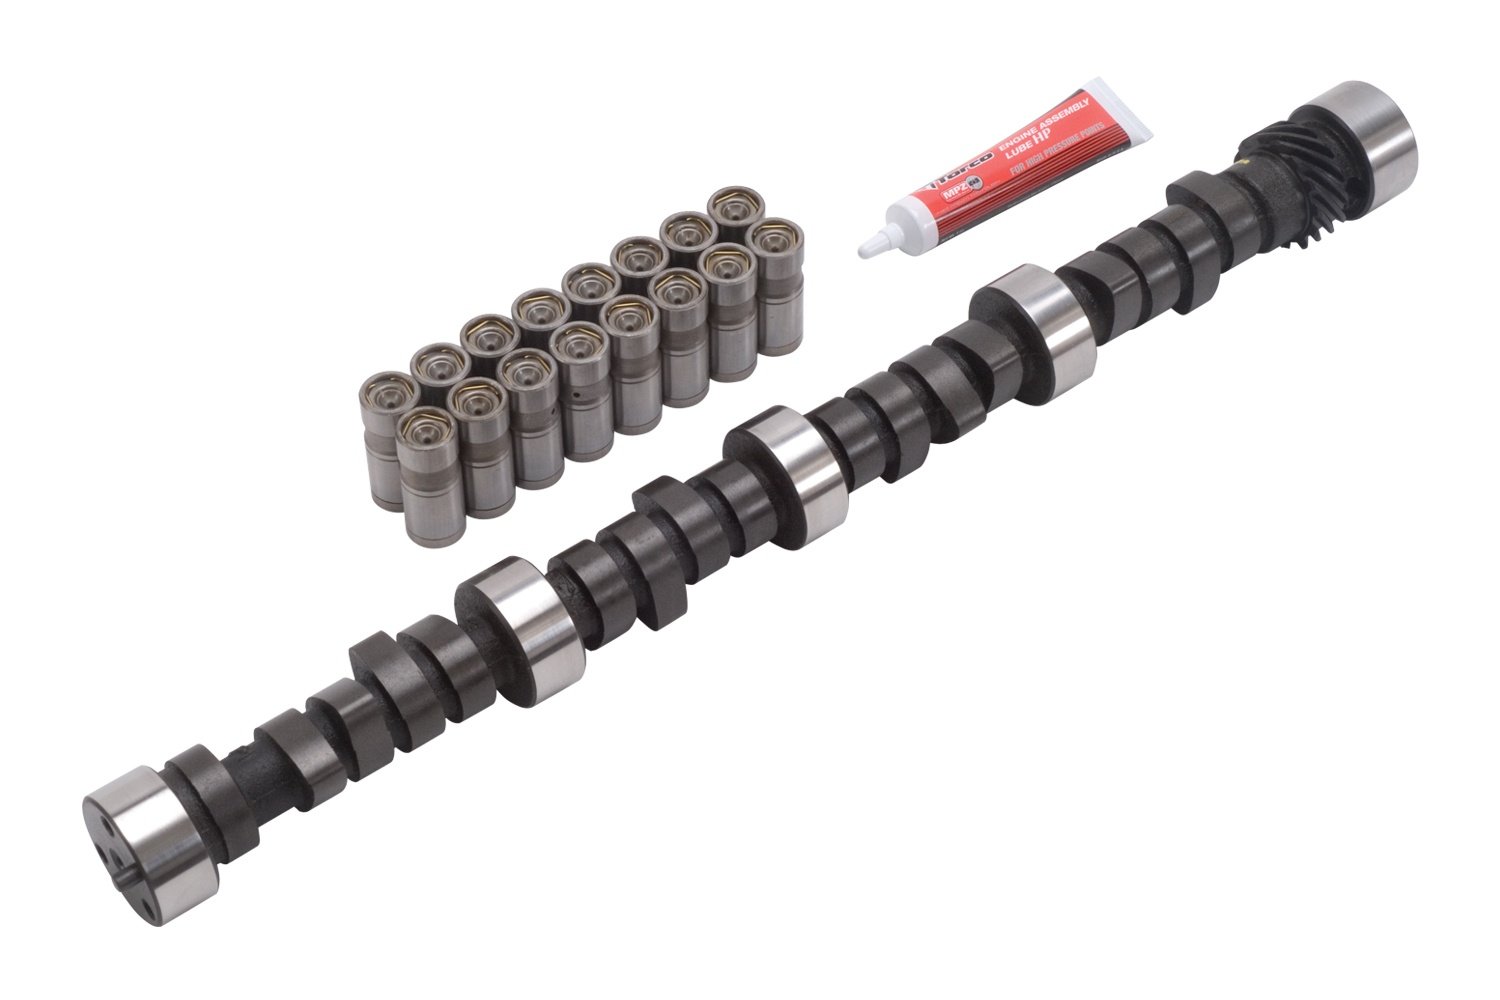 Edelbrock camshaft and lifters for SBC